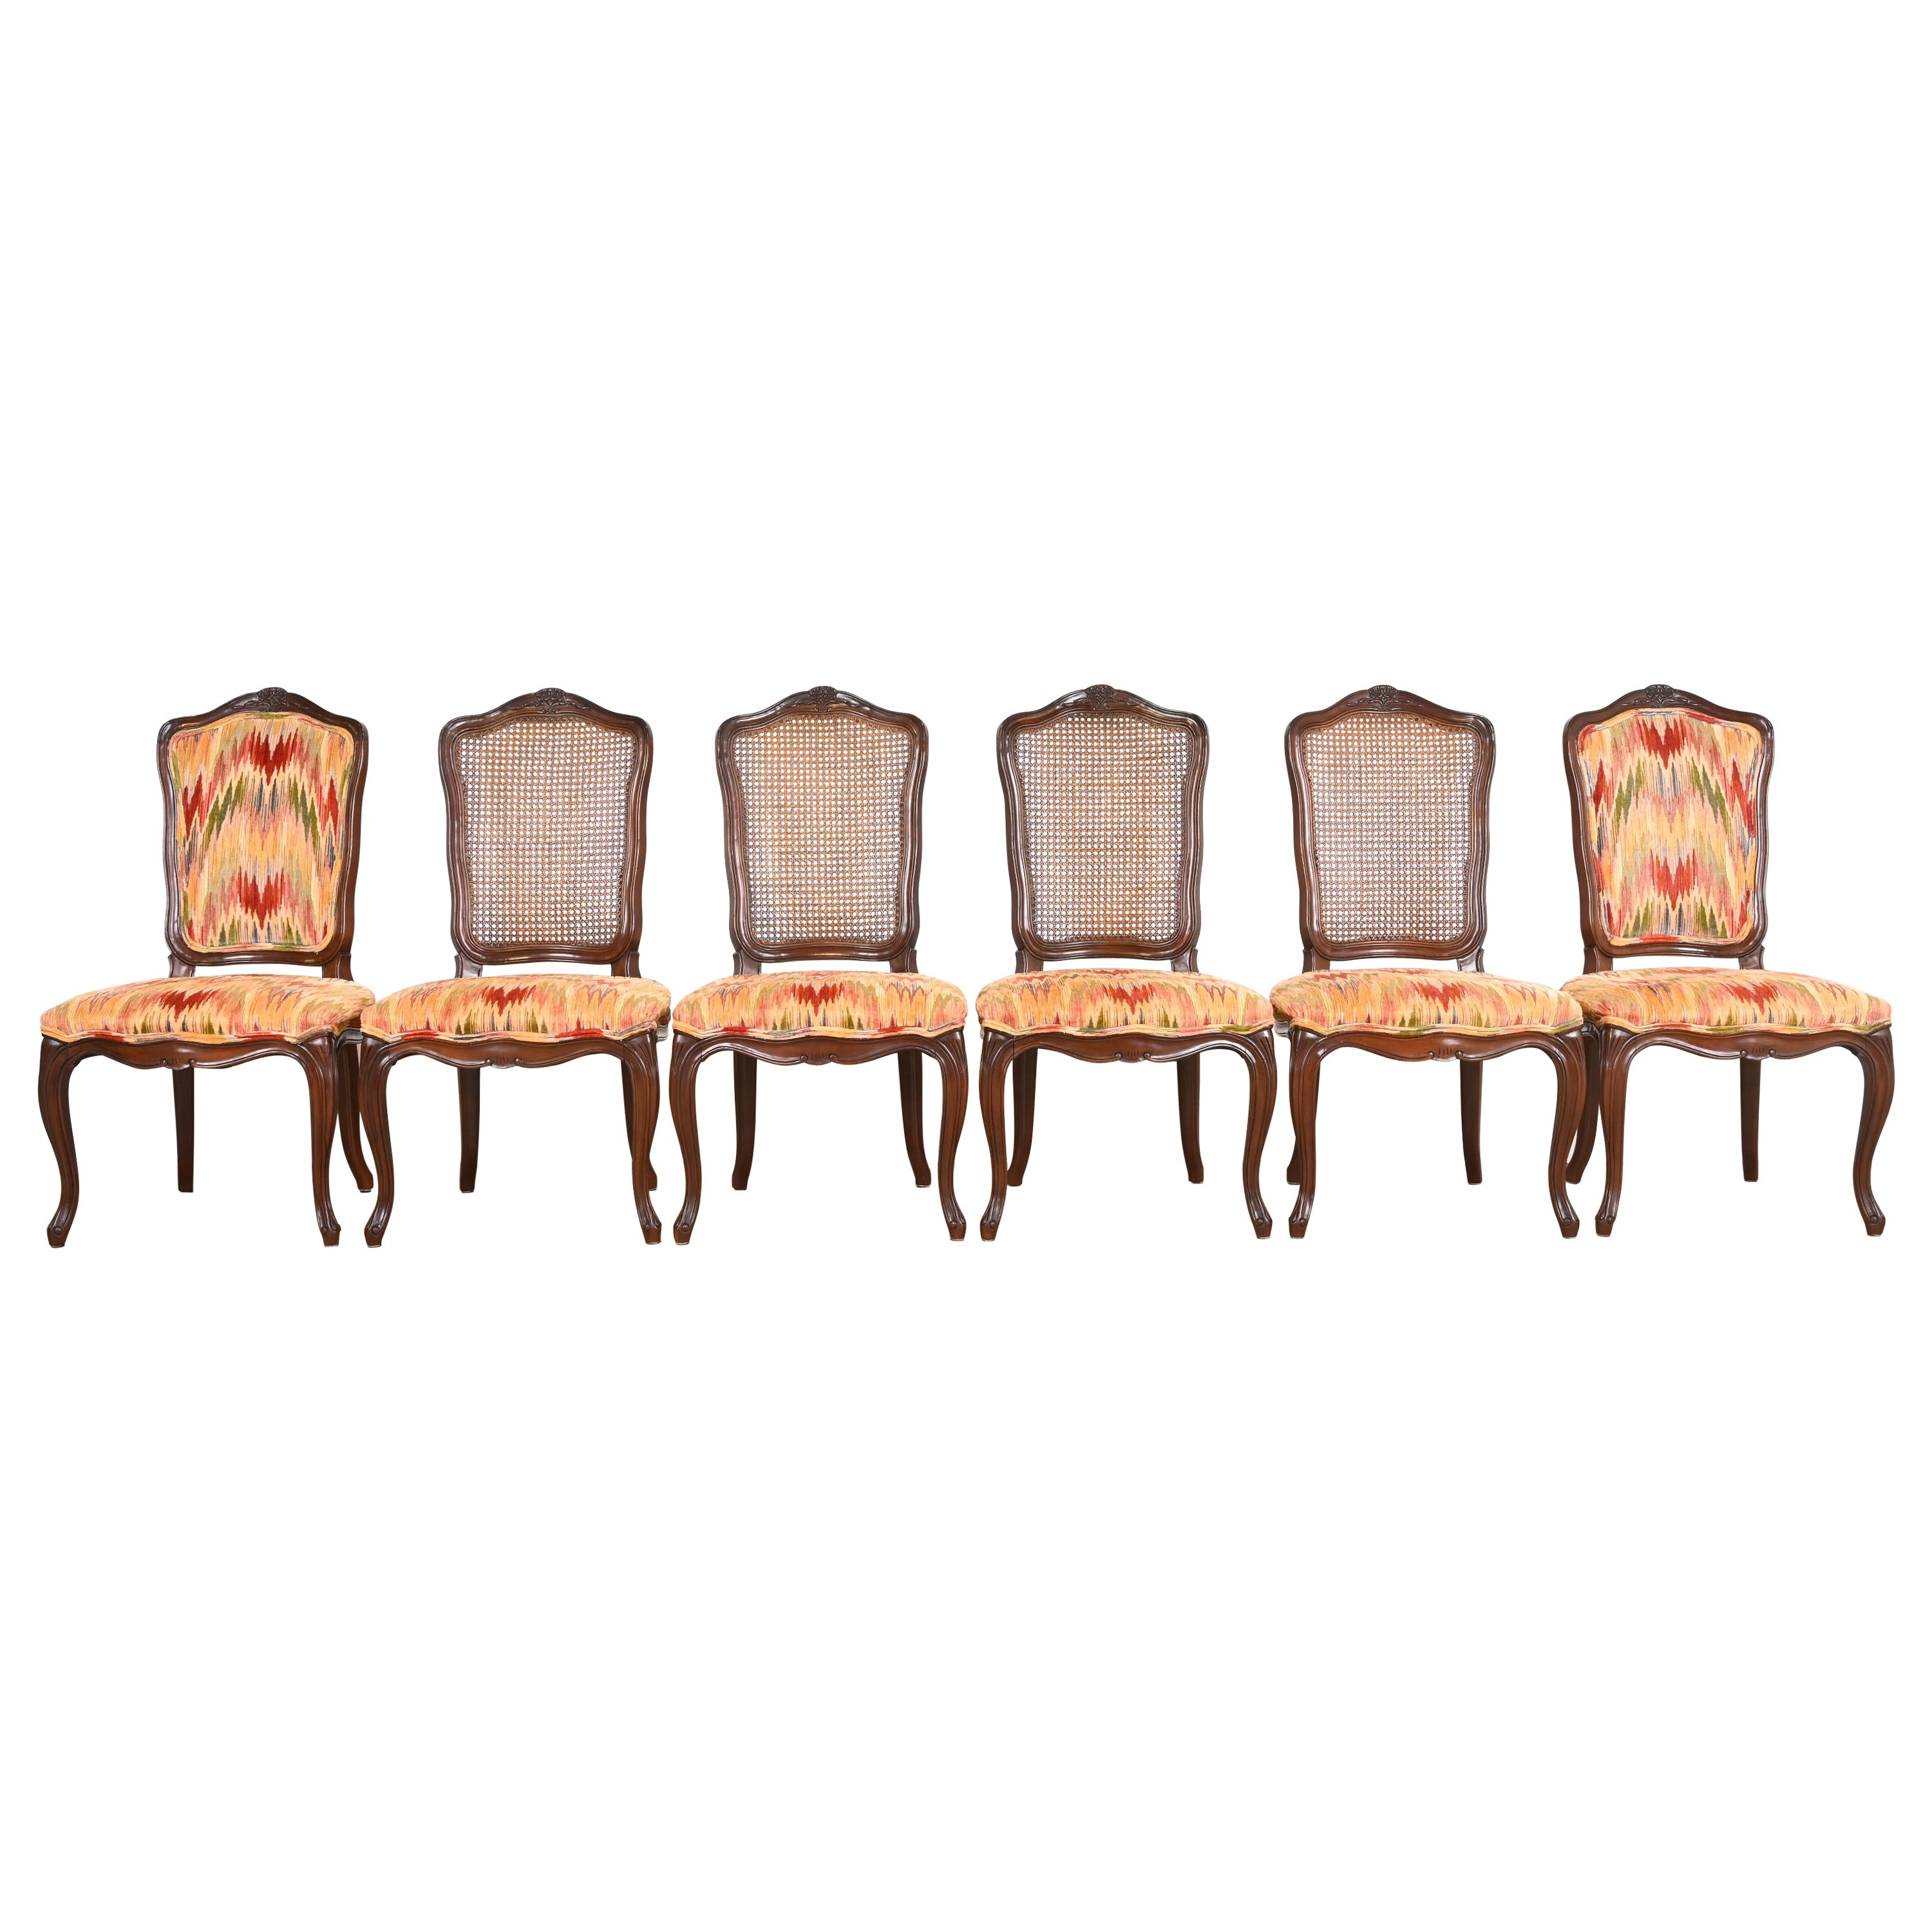 Kindel Furniture French Provincial Louis XV Walnut Cane Back Dining Chairs For Sale